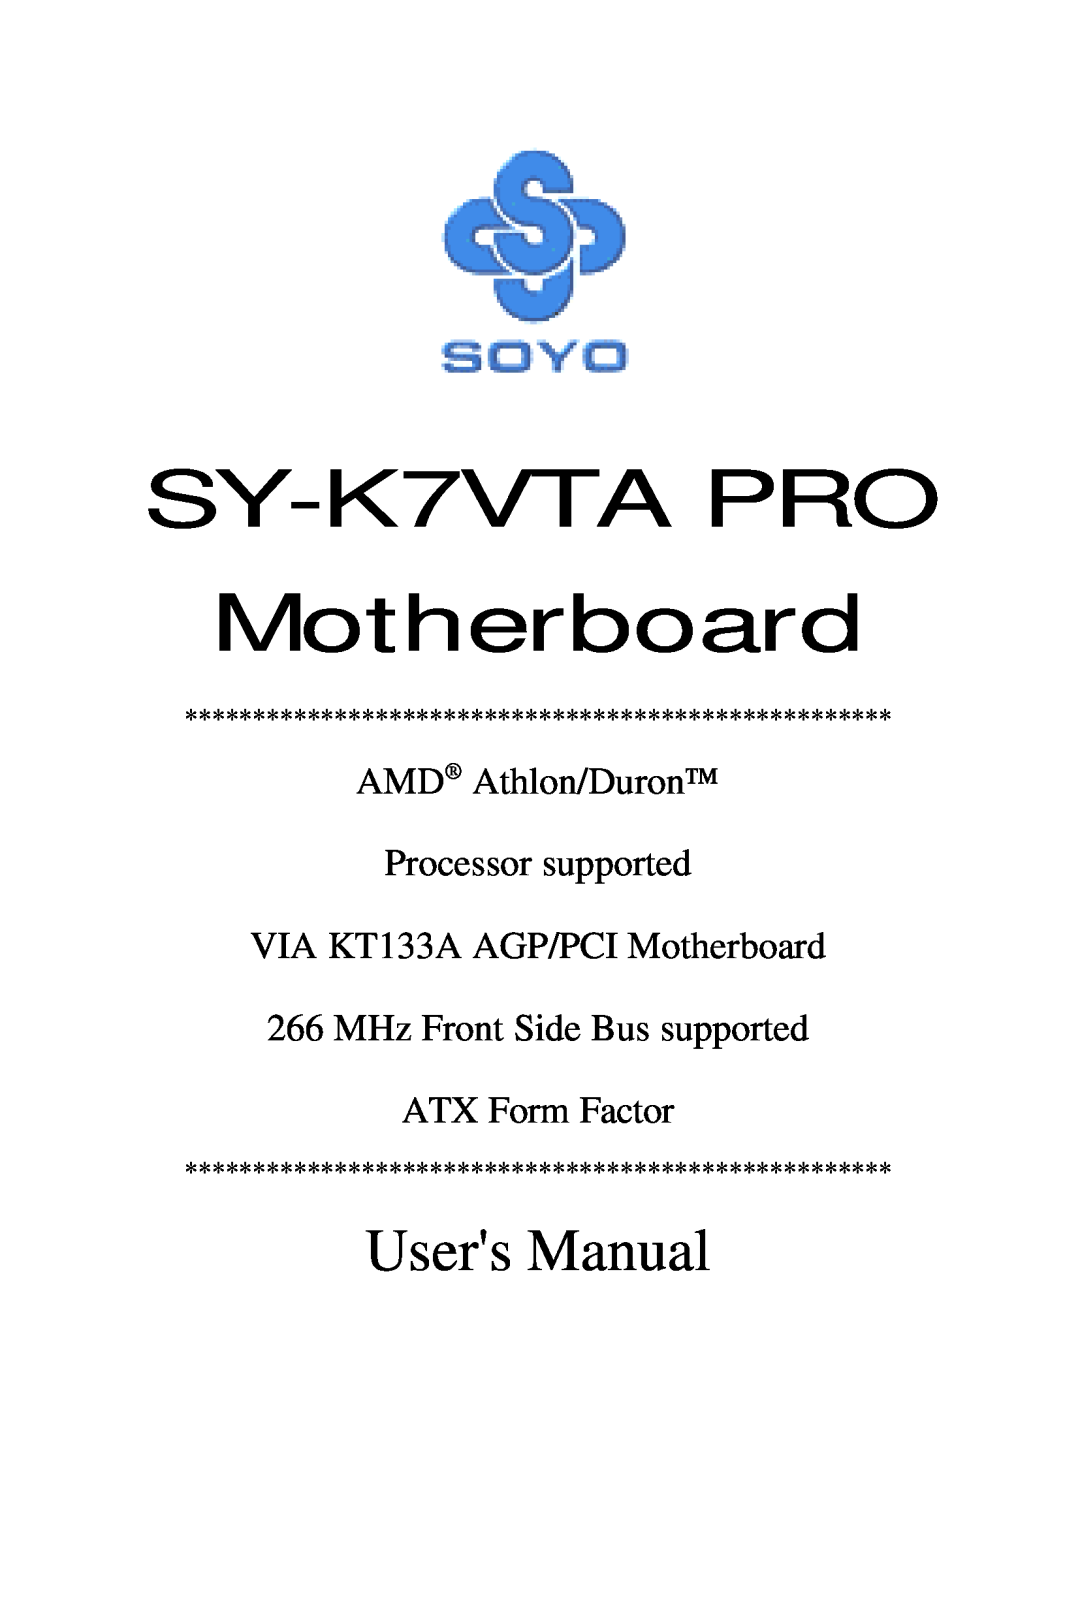 SOYO SY-K7VTA PRO user manual Motherboard, Users Manual, MHz Front Side Bus supported ATX Form Factor 